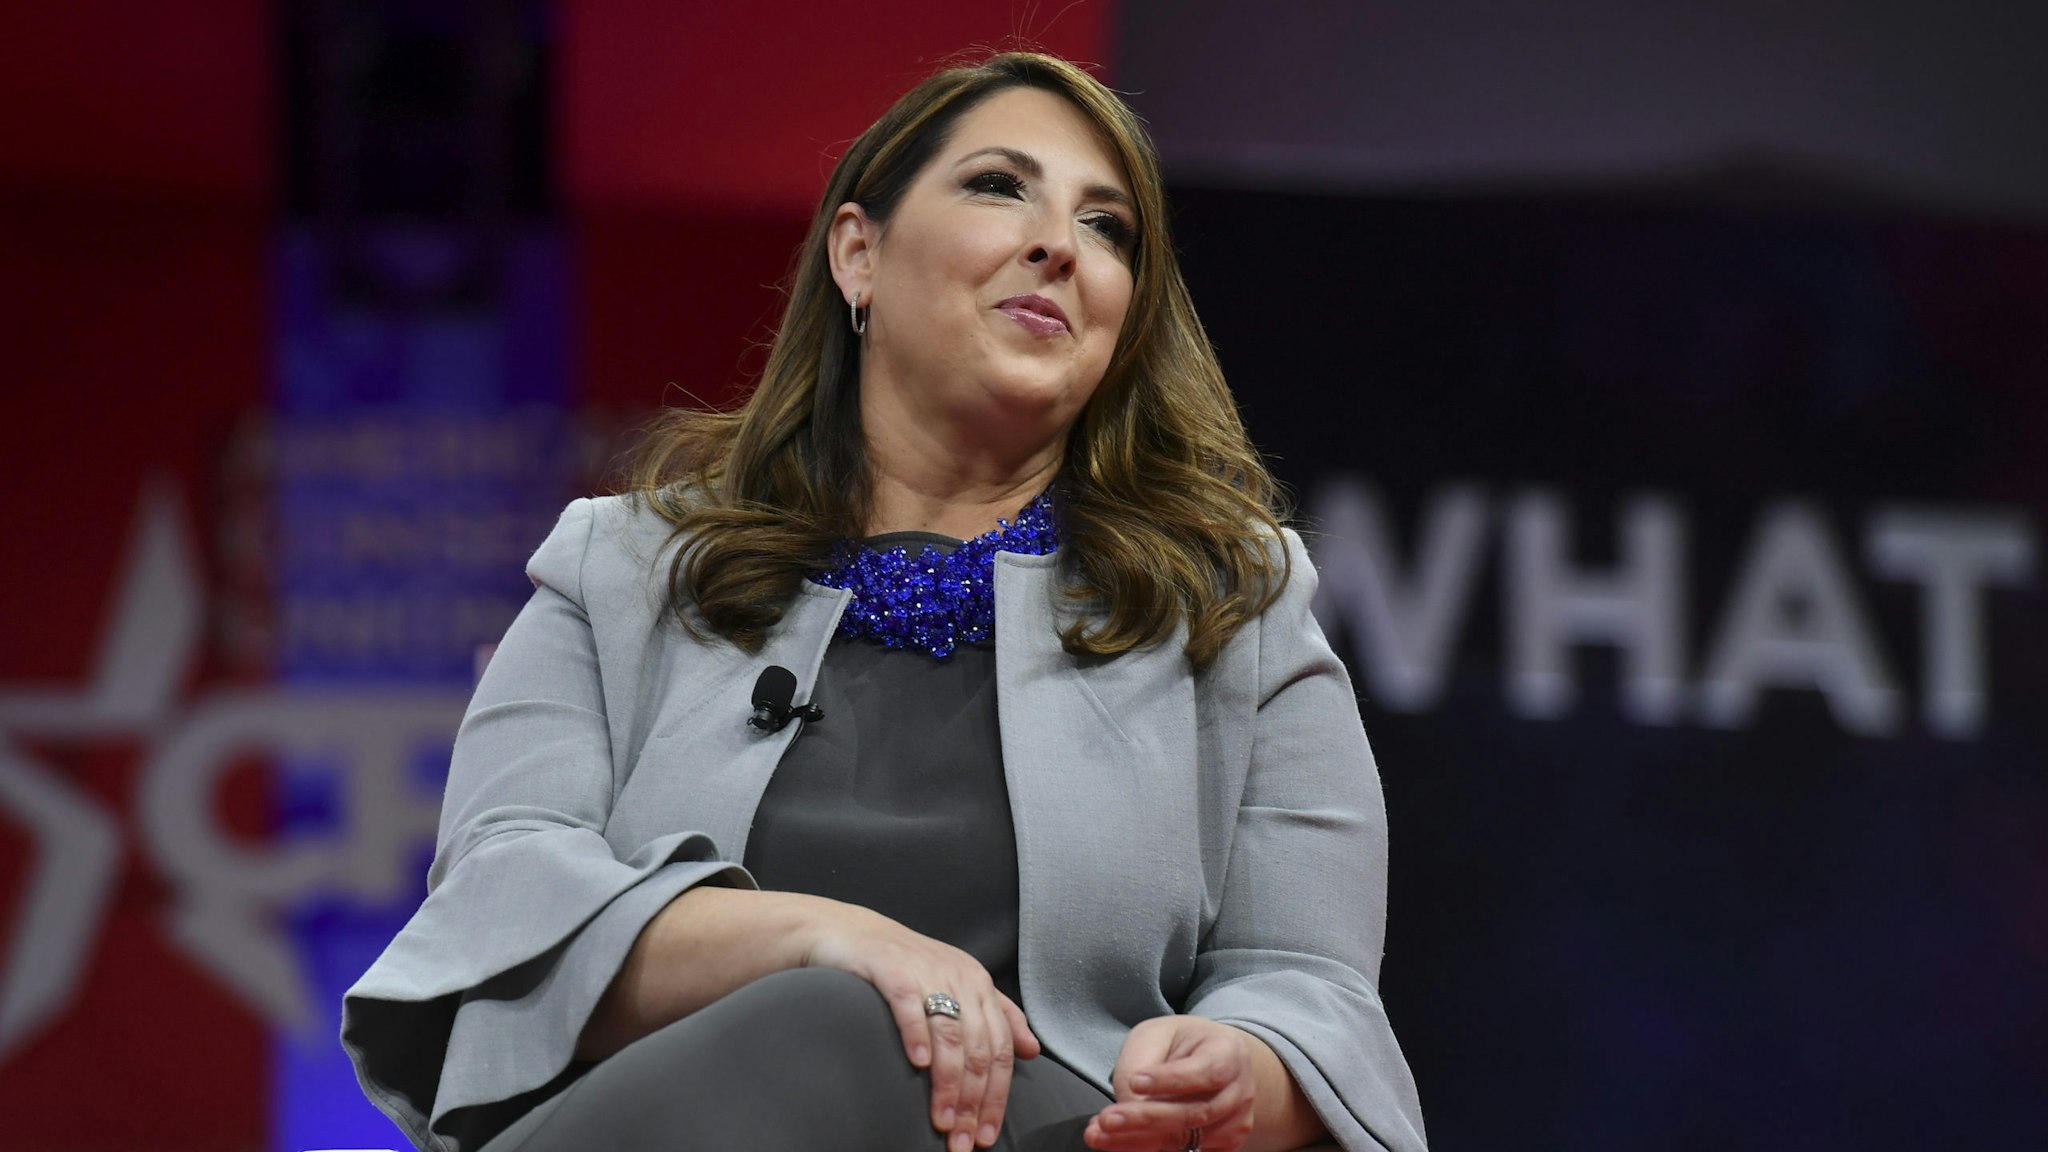 NATIONAL HARBOR, MD - FEBRUARY 28: Ronna McDaniel, Chair of the Republican National Committee speaks during a session at CPAC 2019 on February 28, 2019 in National Harbor, Md. (Photo by Ricky Carioti/The Washington Post via Getty Images)